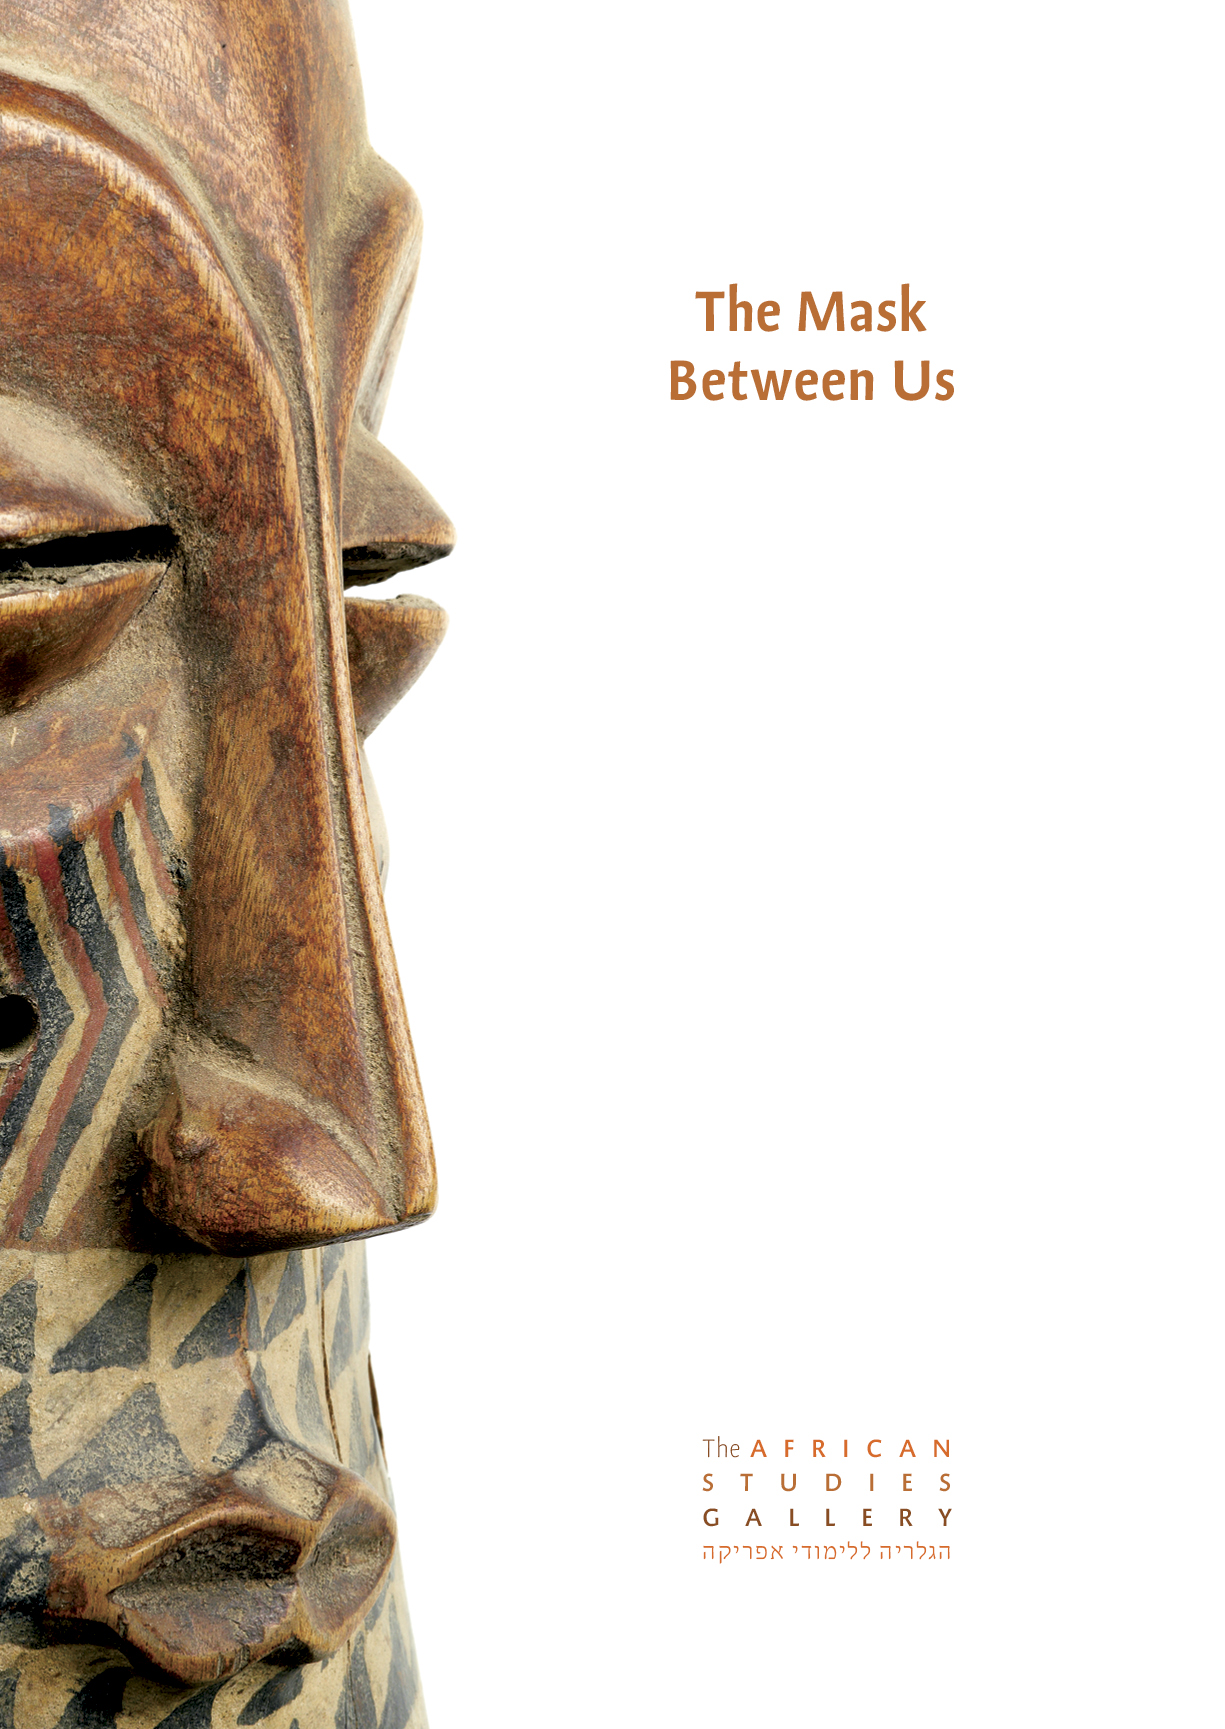 https://www.africanstudiesgallery.org/catalogues/masks.pdf